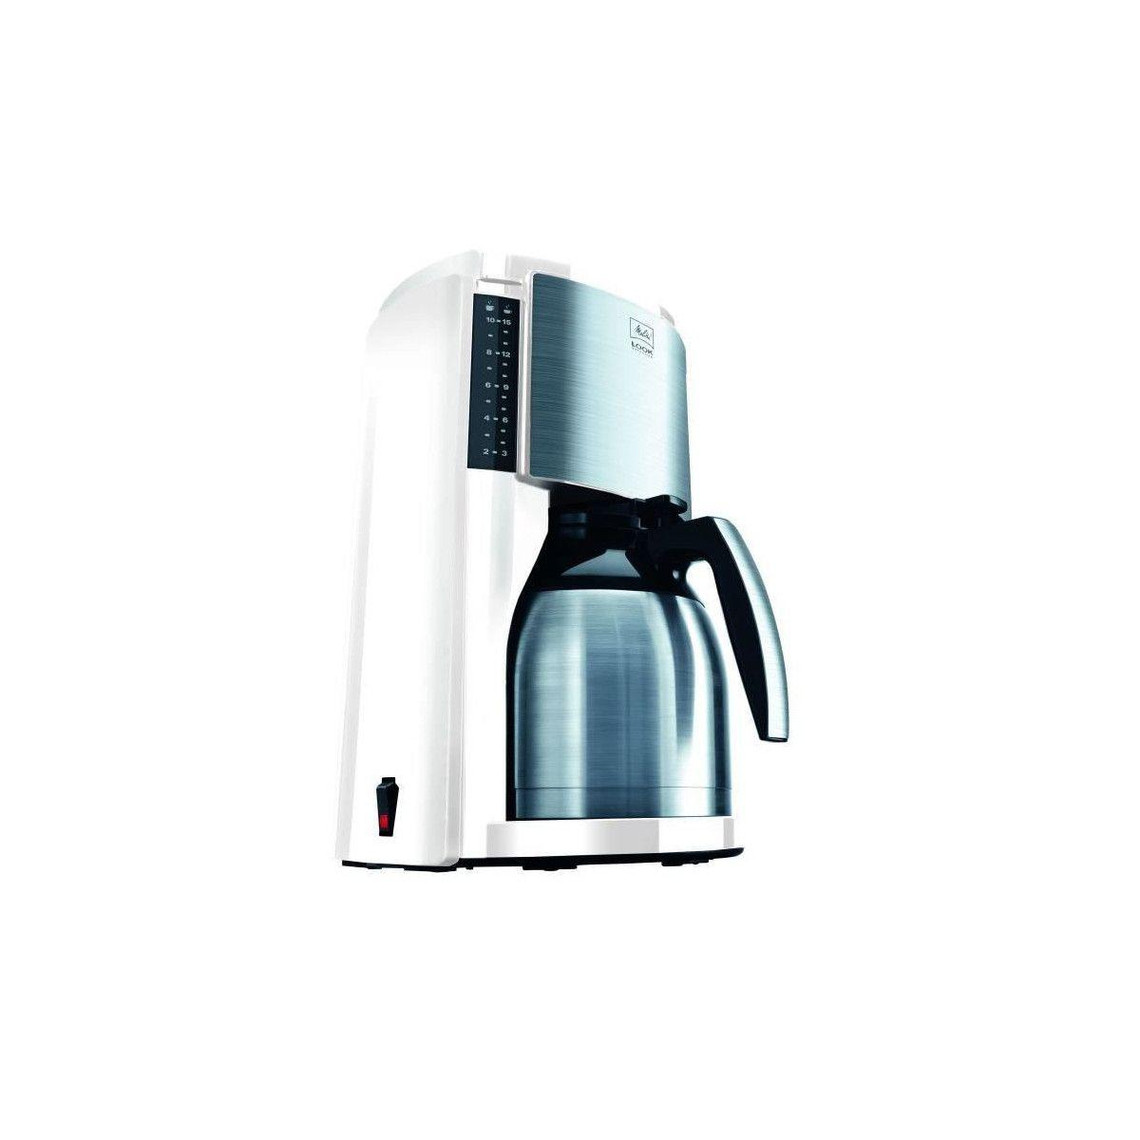 Melitta Melitta M661 Cafetiere Filtre Avec Verseuse Isotherme Look Therm Selection - Blanc